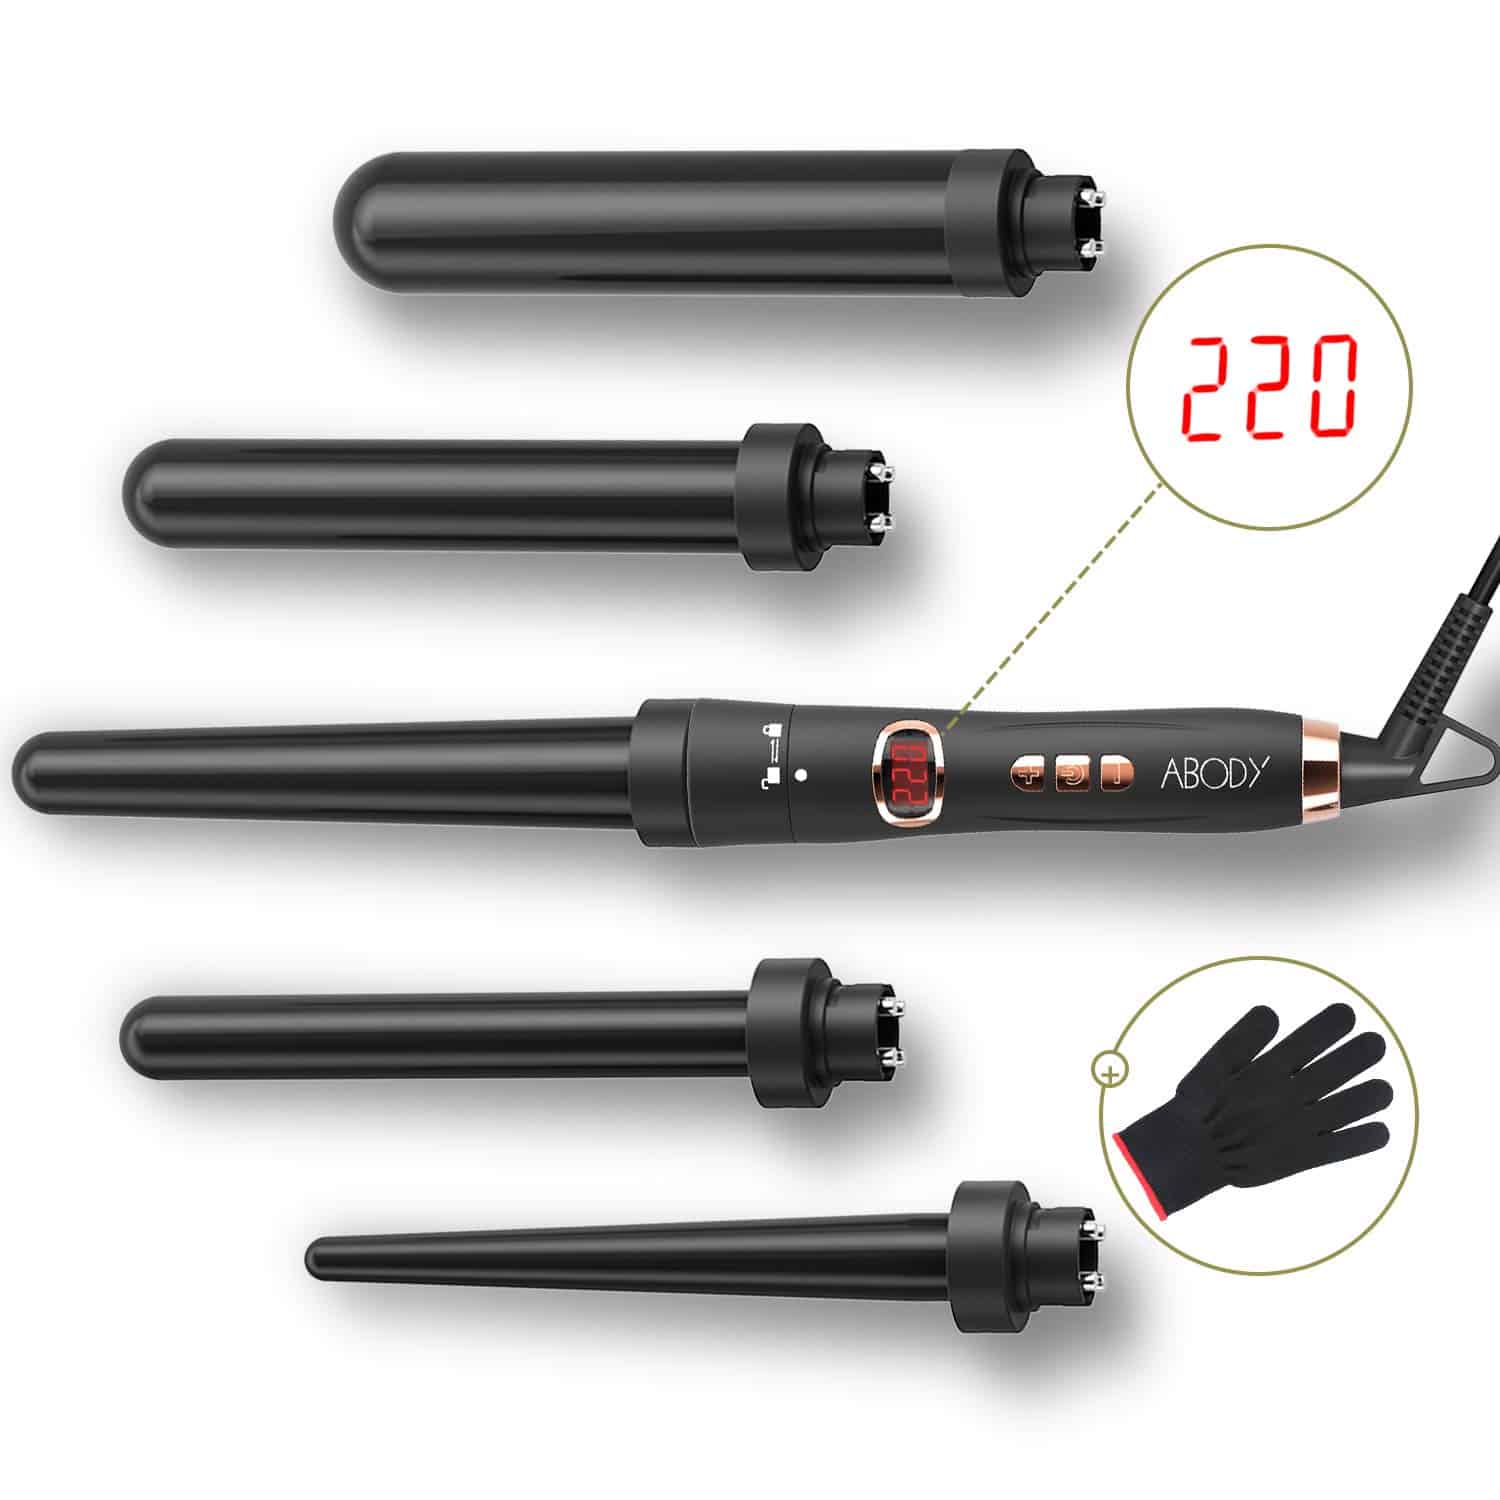 7. Abody 5 In 1 Curling Iron Wand 